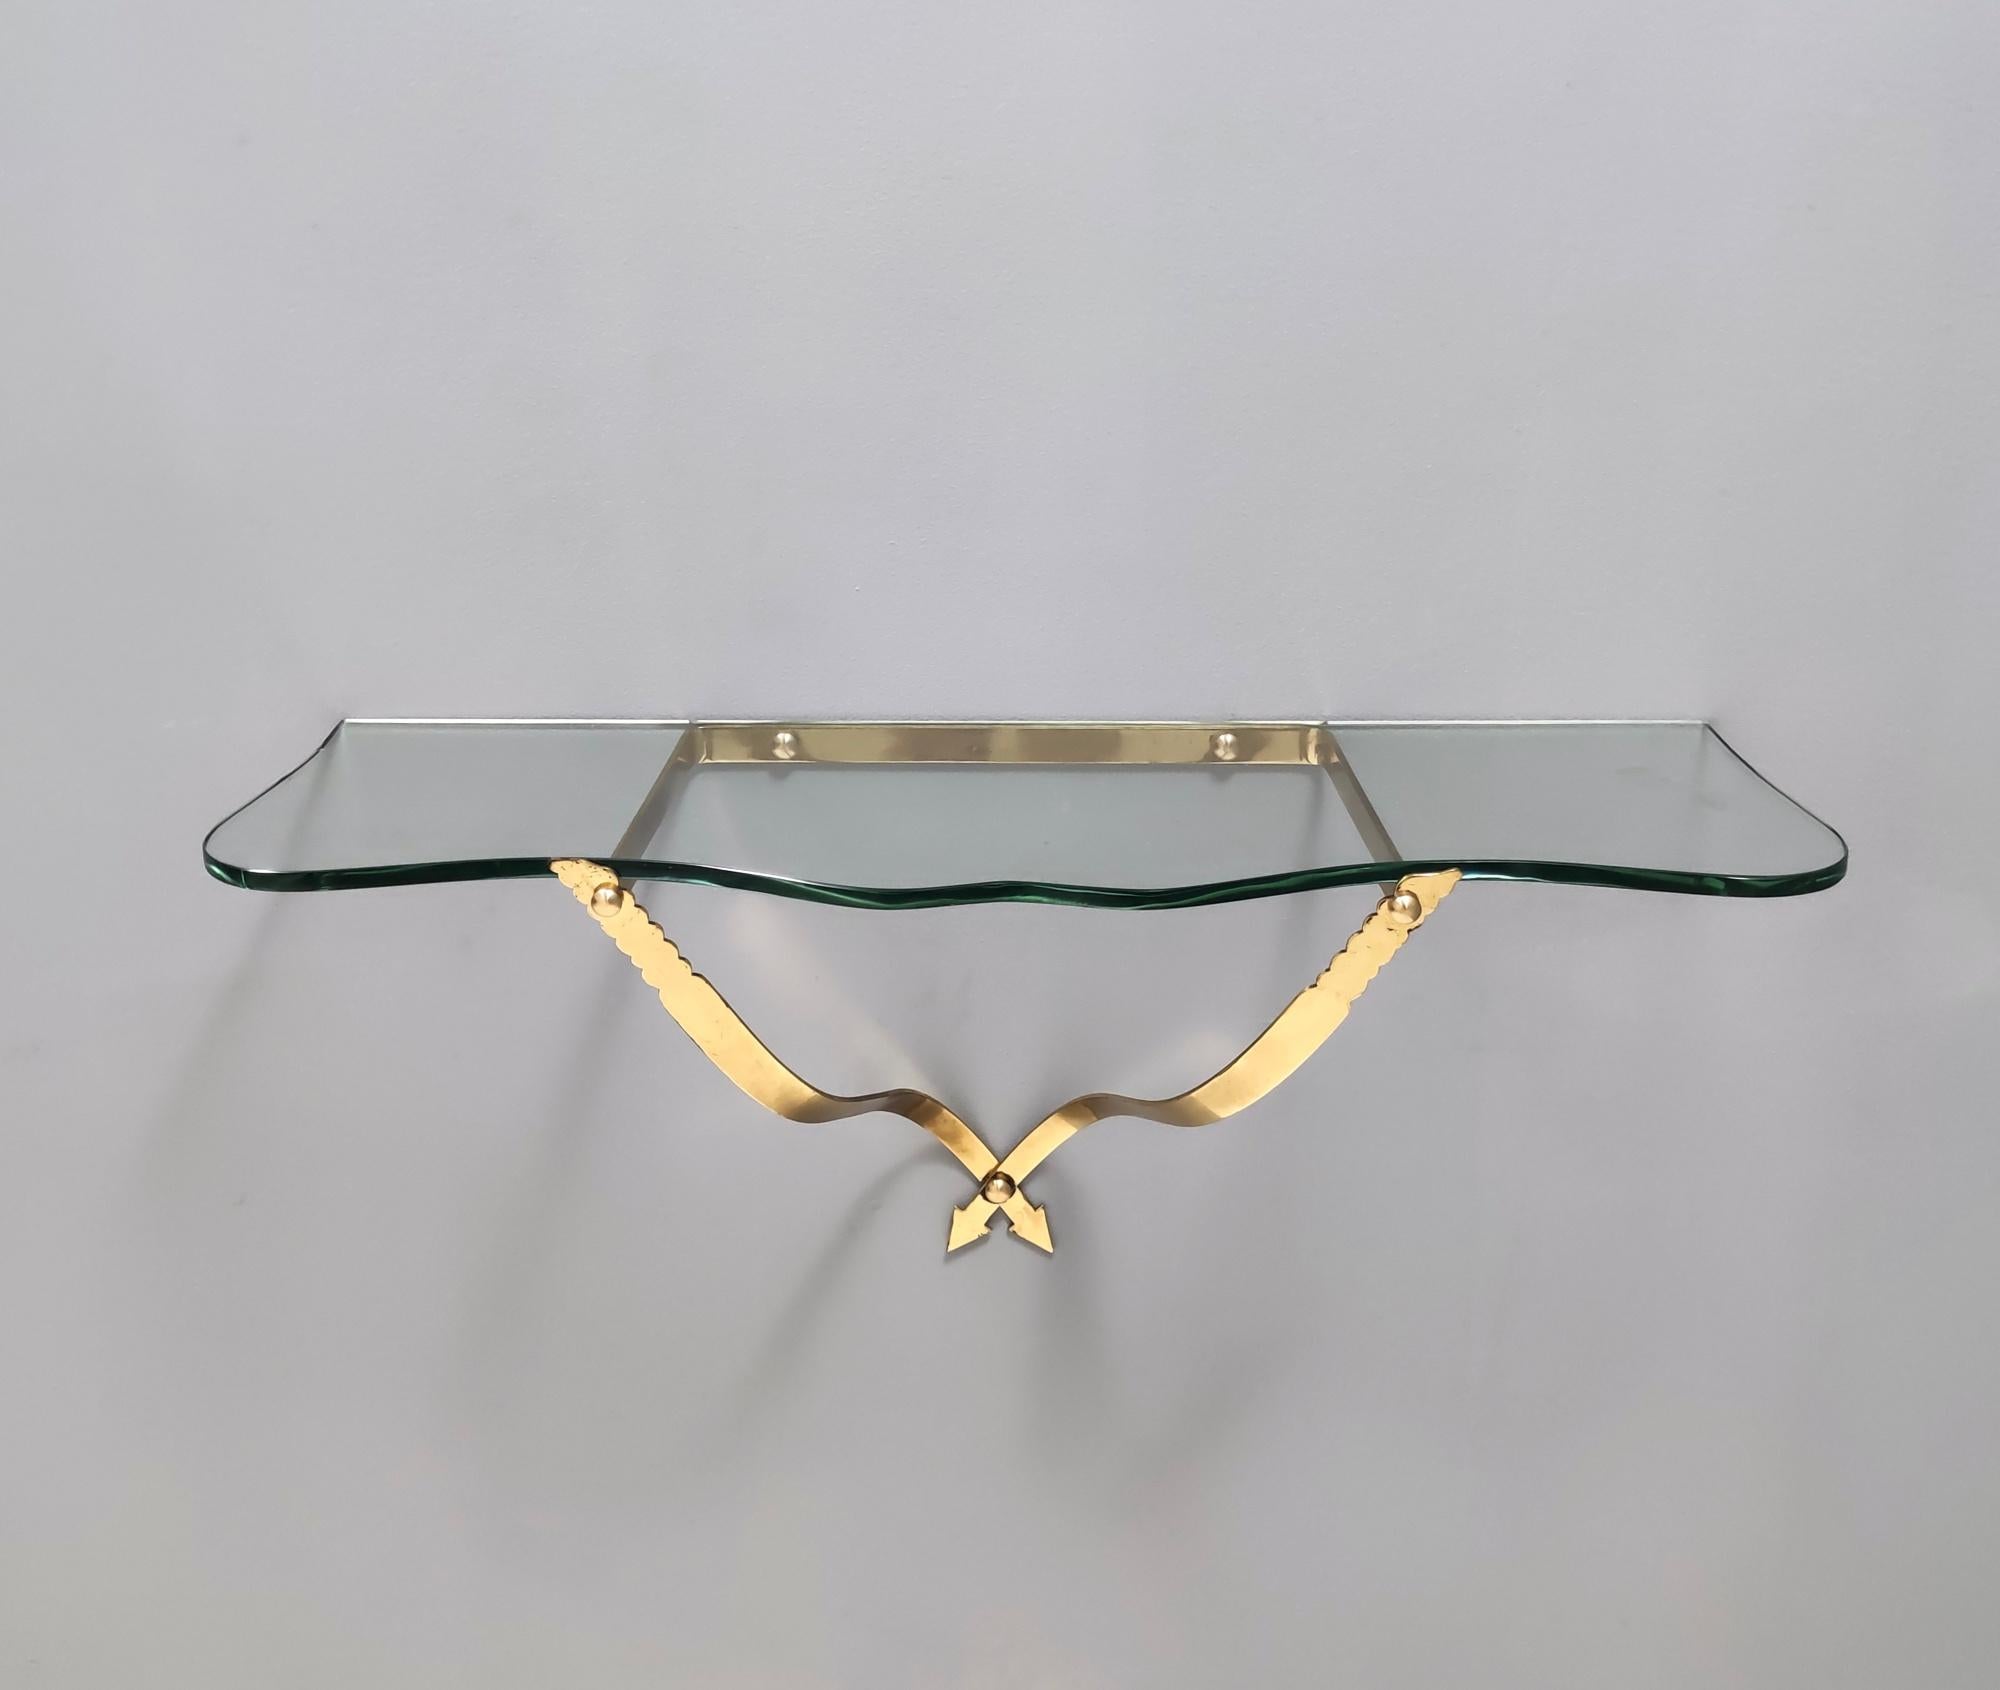 Vintage Crystal and Brass Wall-Mounted Console Table by Cristal Art, Turin Italy 1